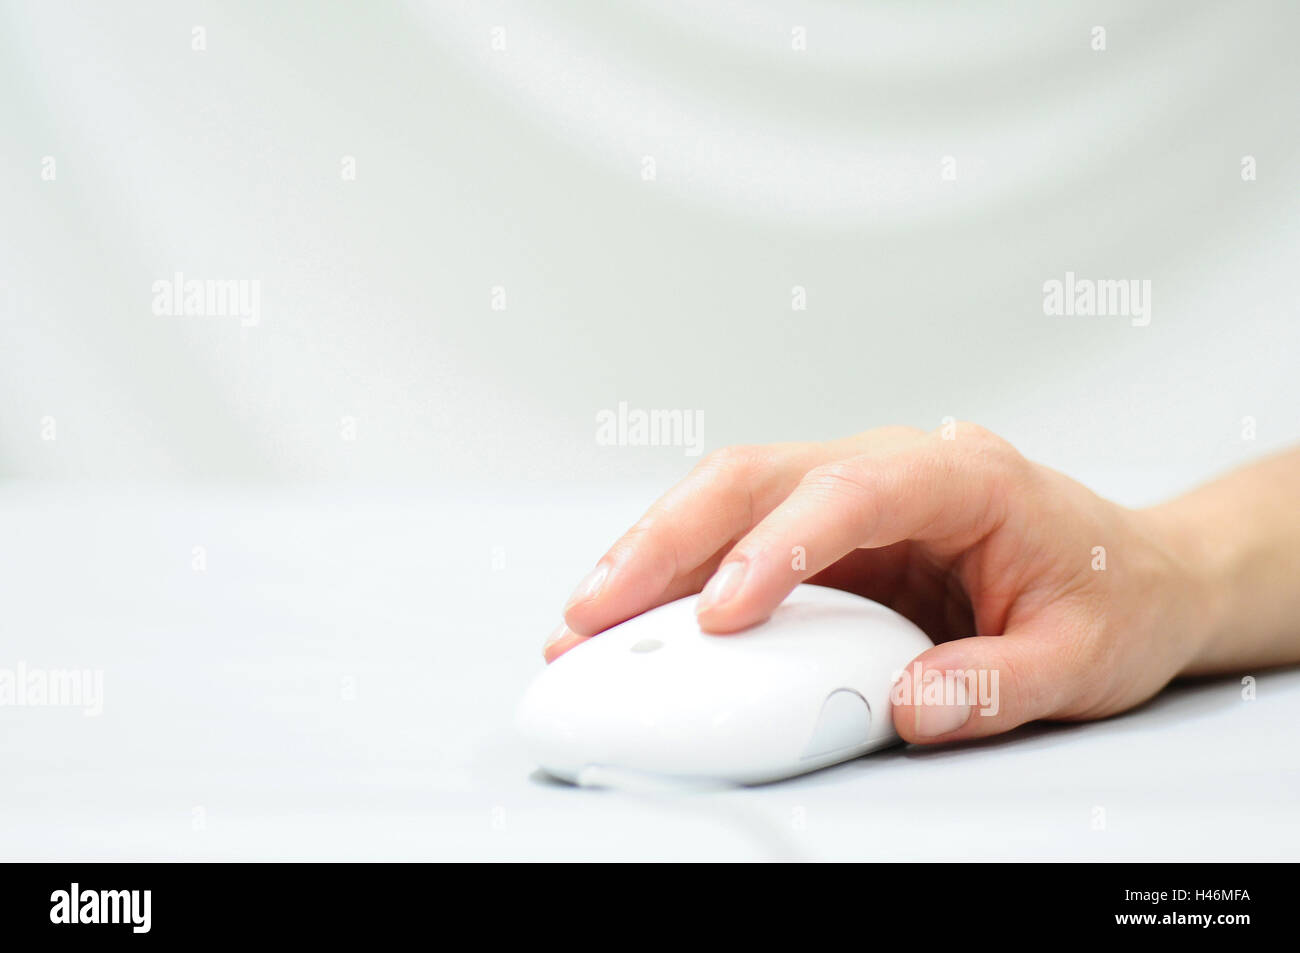 Hand, computer mouse, mouse, lead, work, click, click, creatively, solution, professional life, Internet, computer work, white, easily, serve, decide, finger, pollexes, Stock Photo